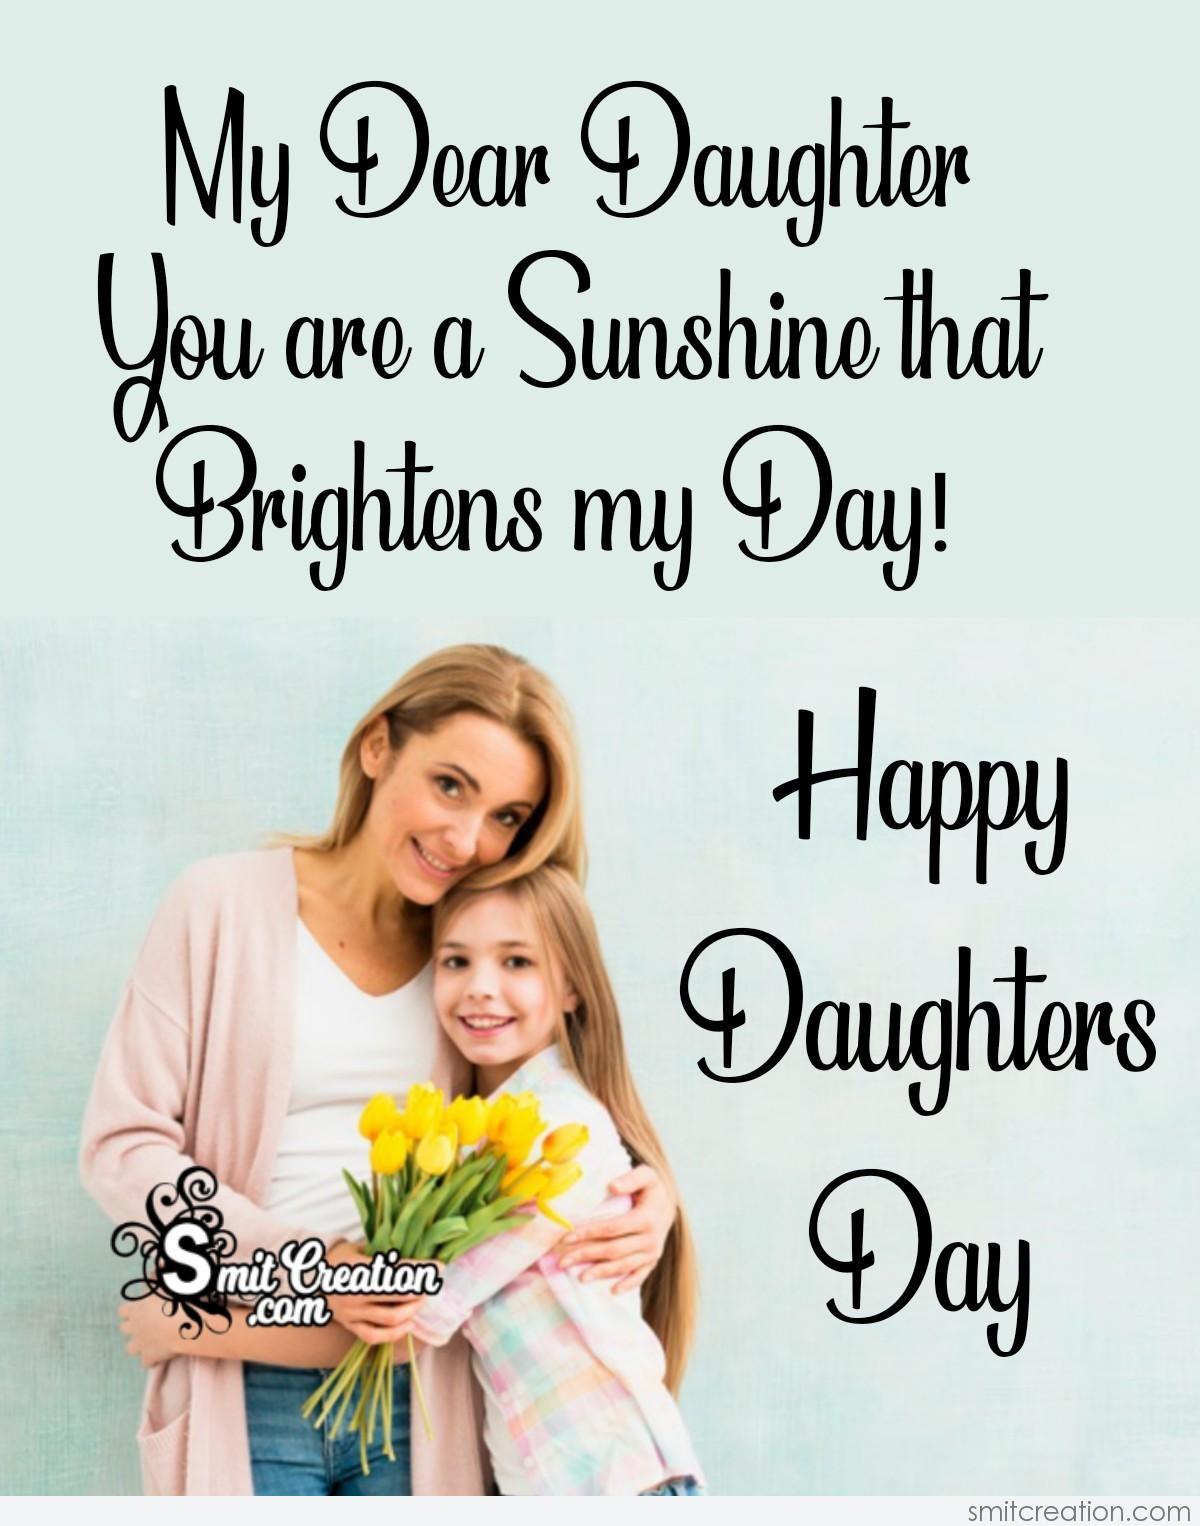 Happy Daughters Day My Dear Daughter - SmitCreation.com